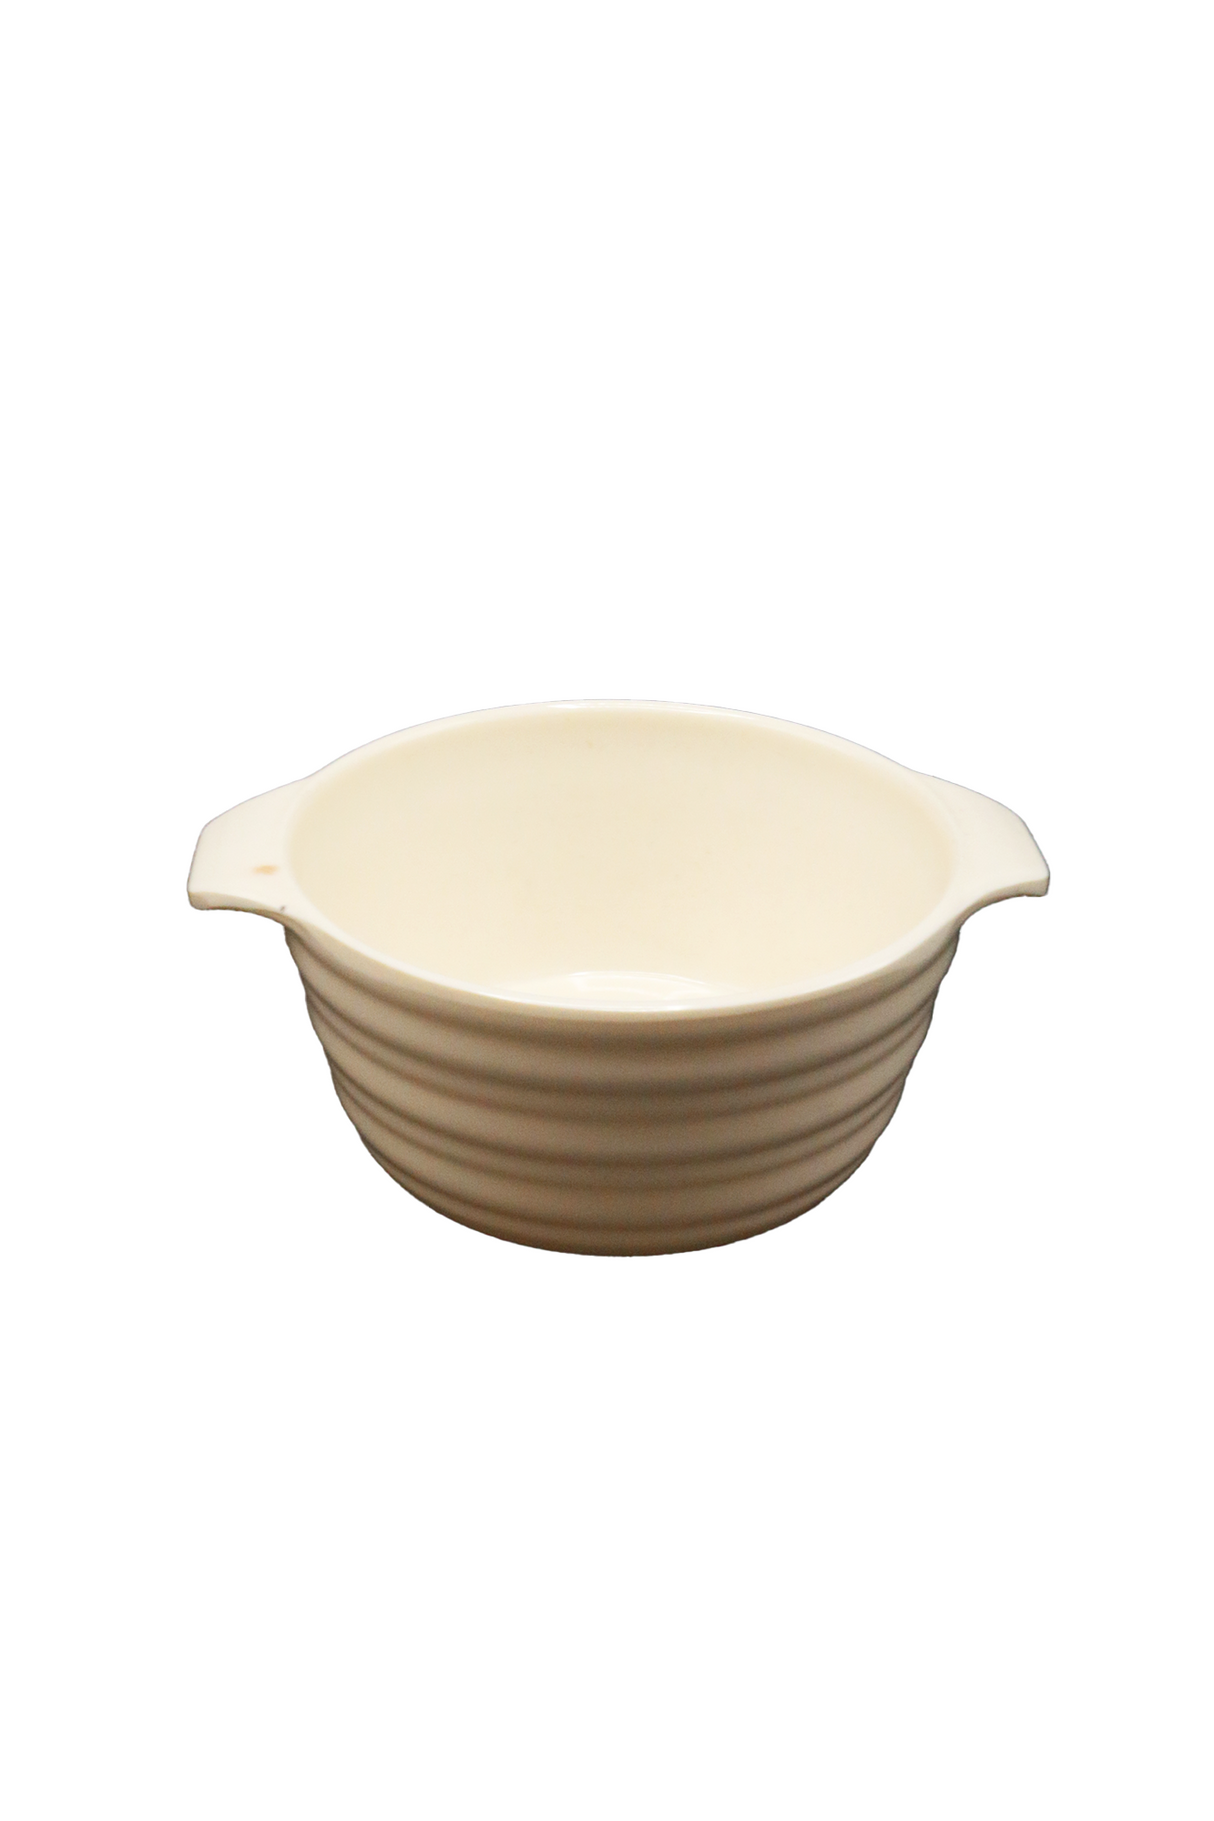 ow bowl 5.5" handle